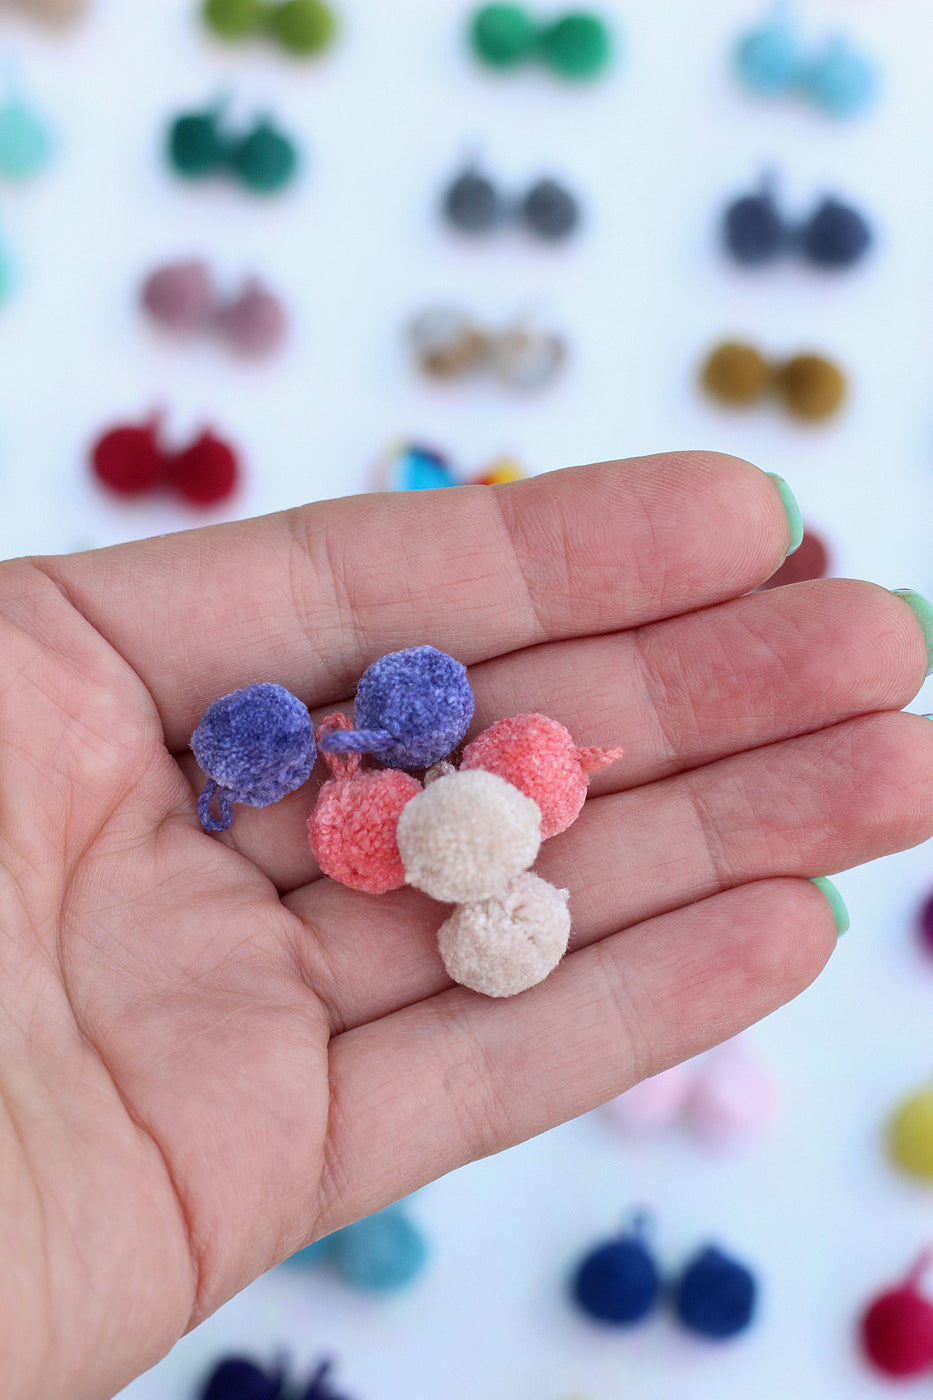 MINI Luxe Pom Poms with Loops, 1/4" Cotton Pom Baubles